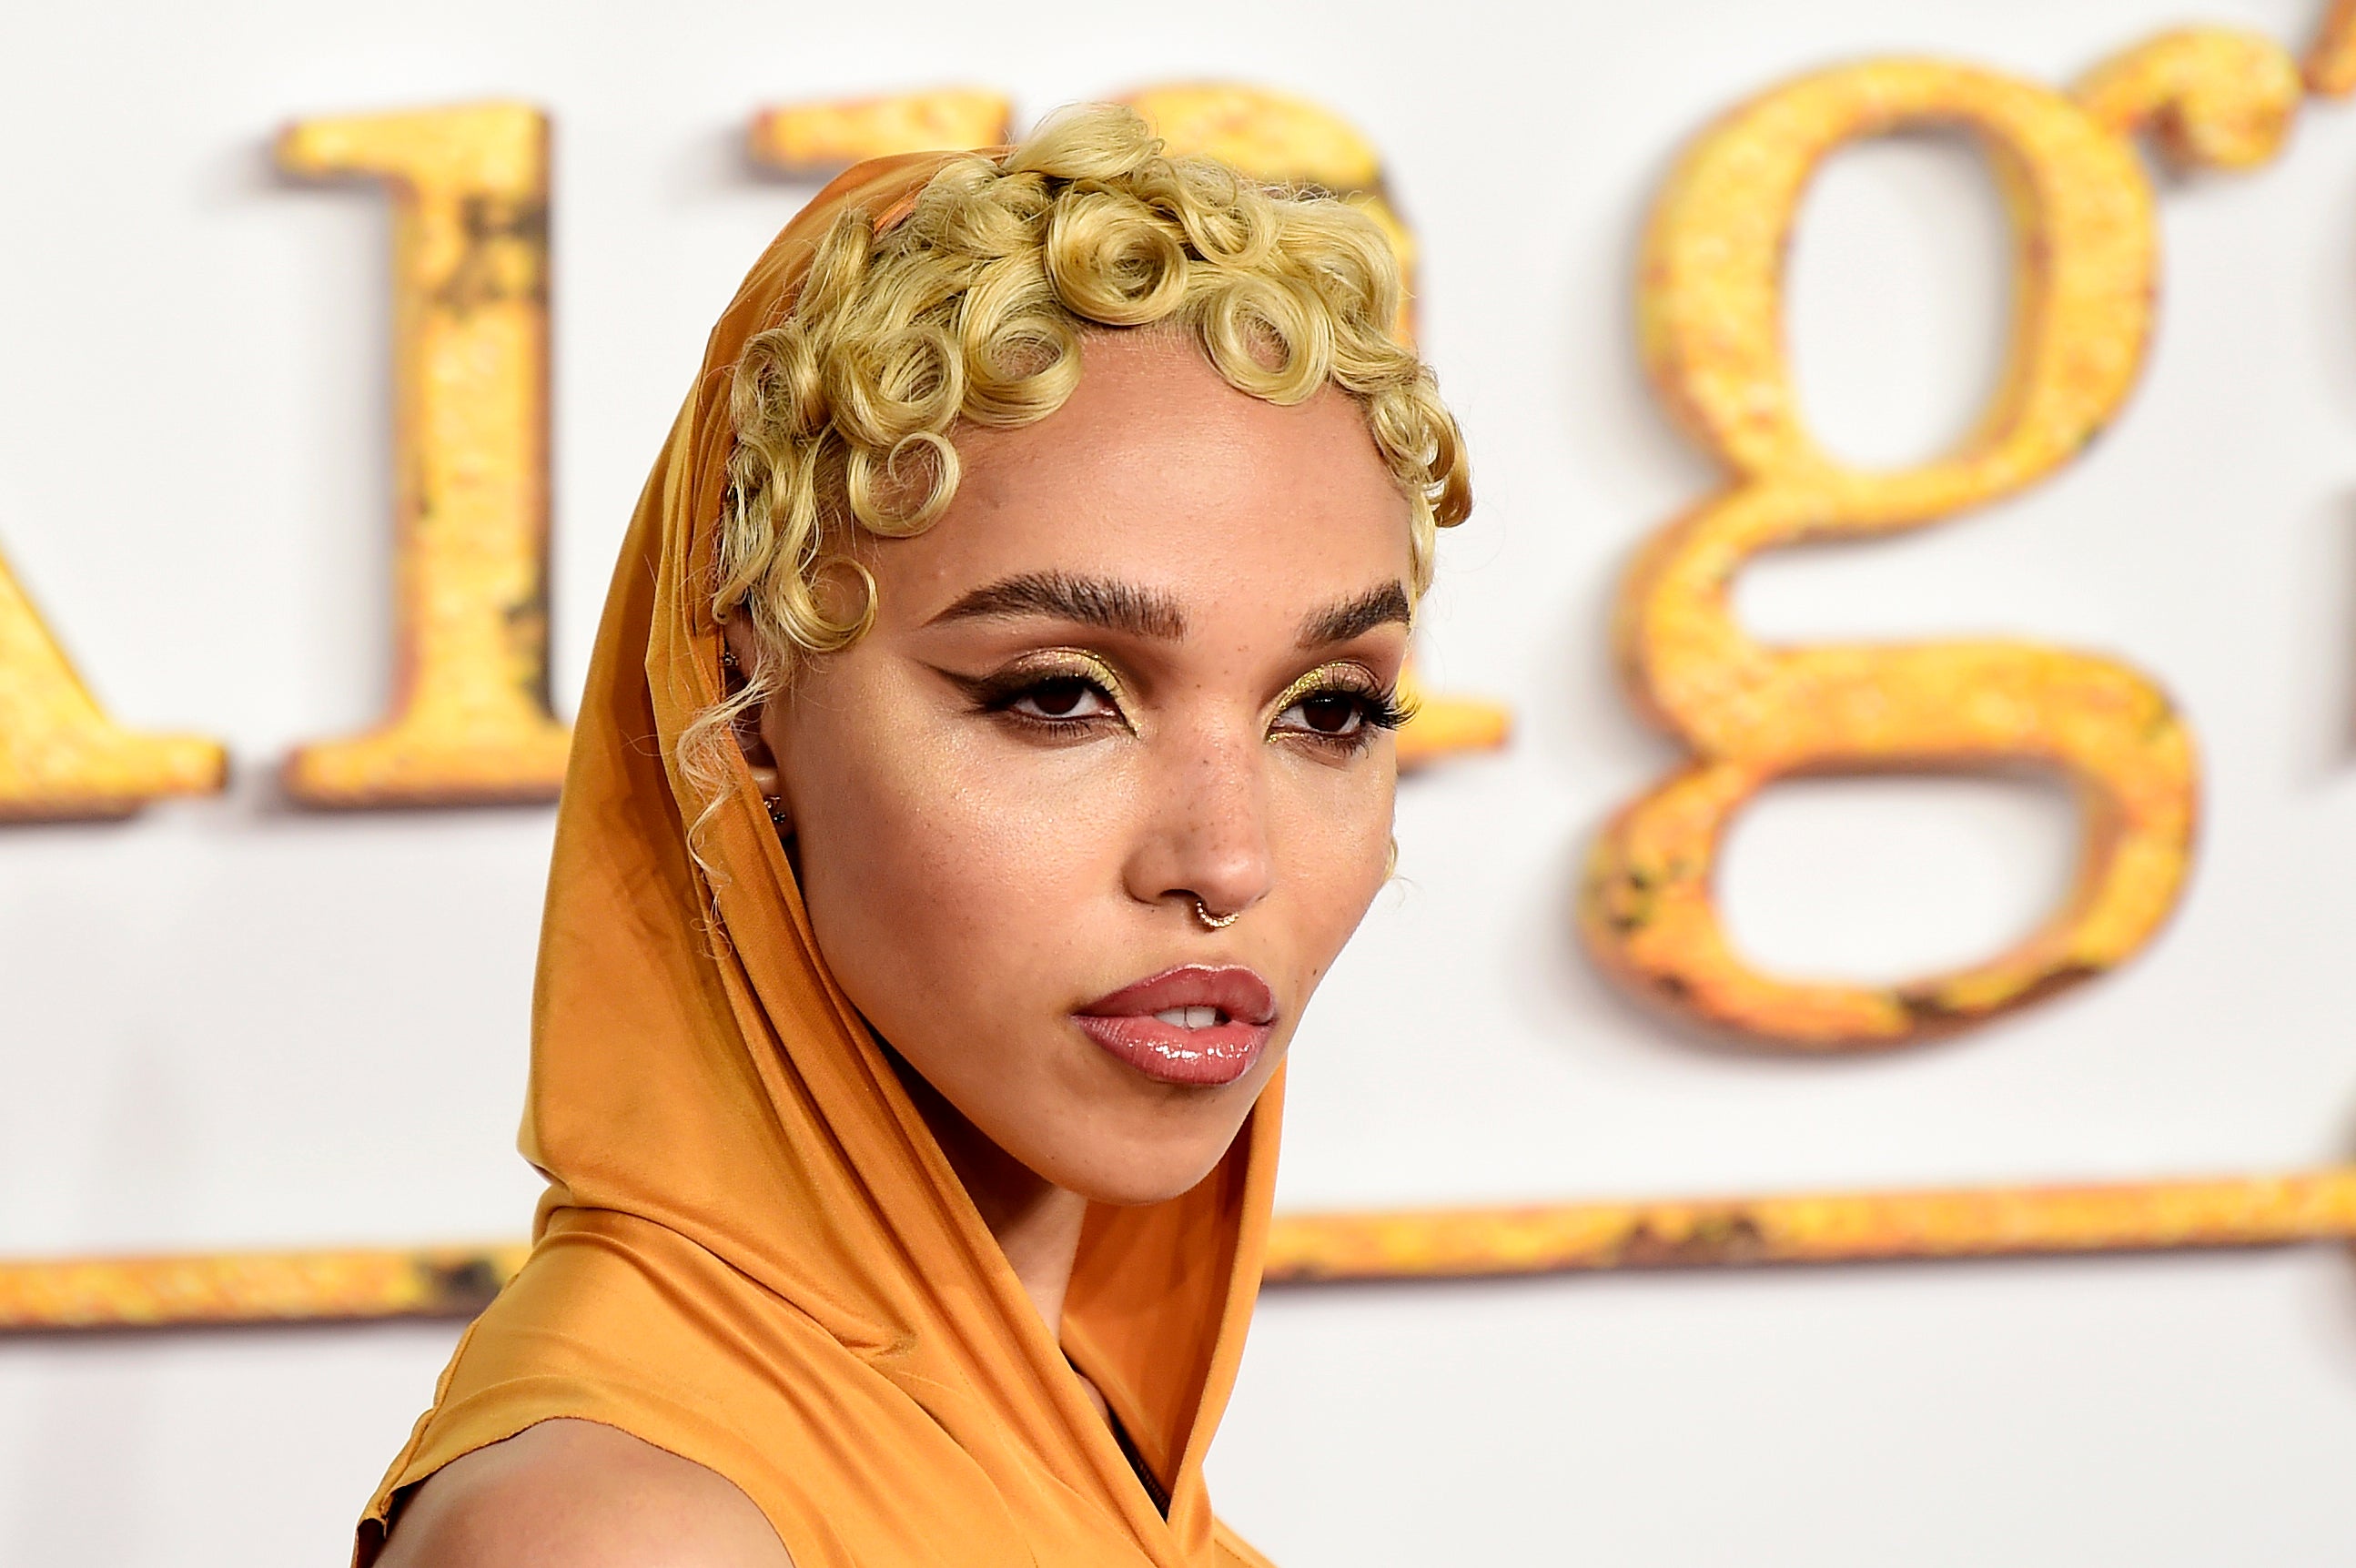 FKA Twigs attends the World Premiere of "The King's Man" at Cineworld Leicester Square